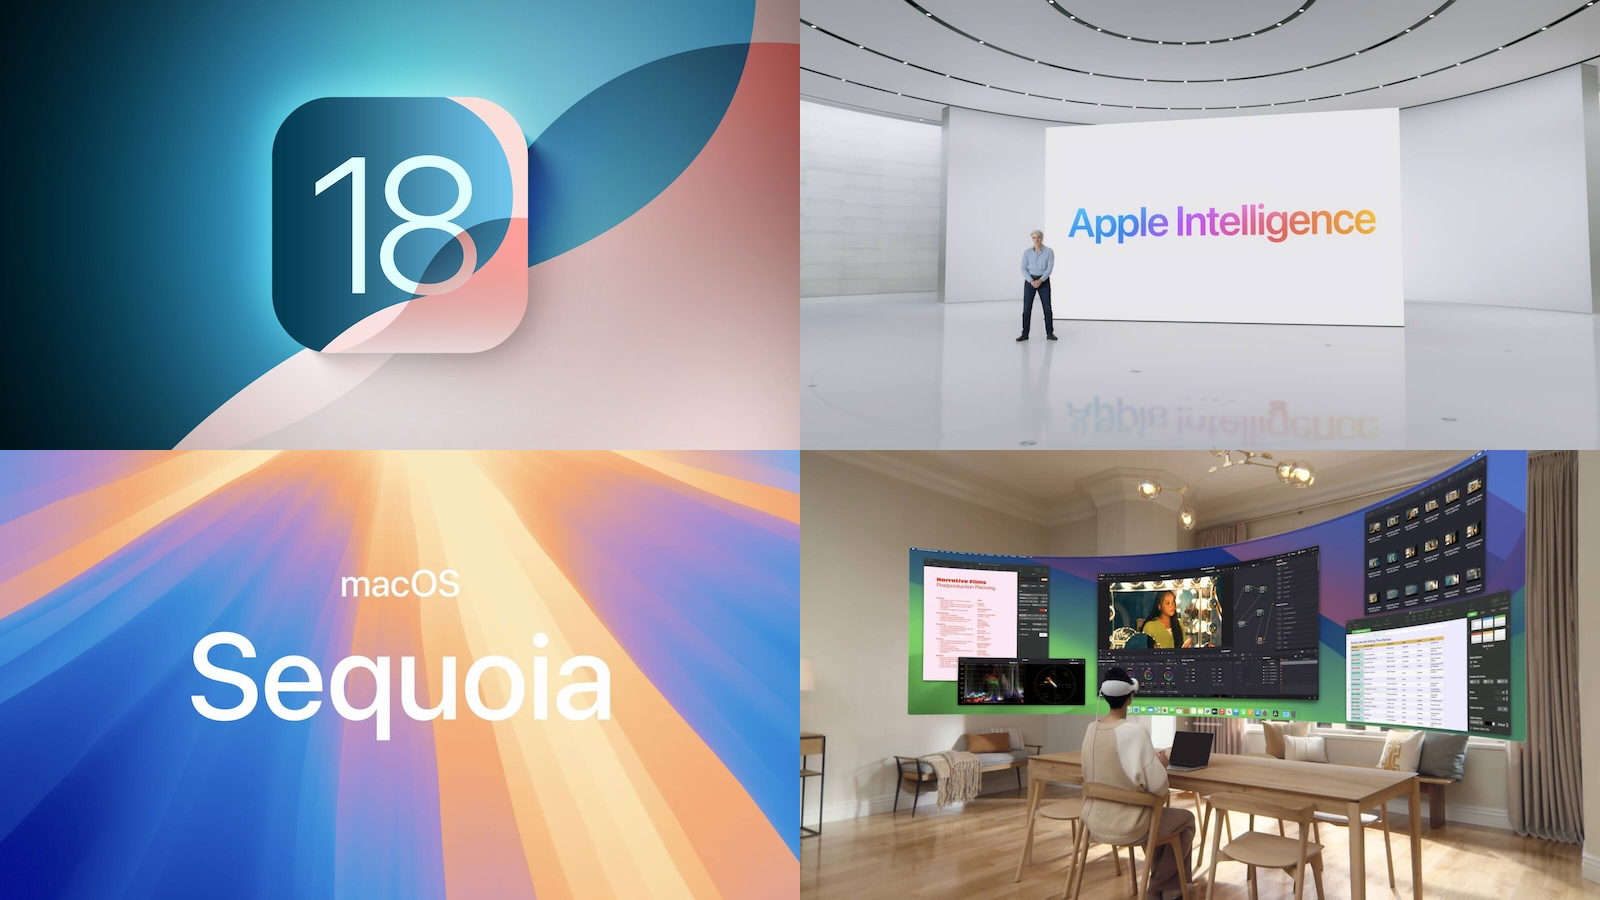 Top Stories: WWDC Recap With iOS 18, Apple Intelligence, and More